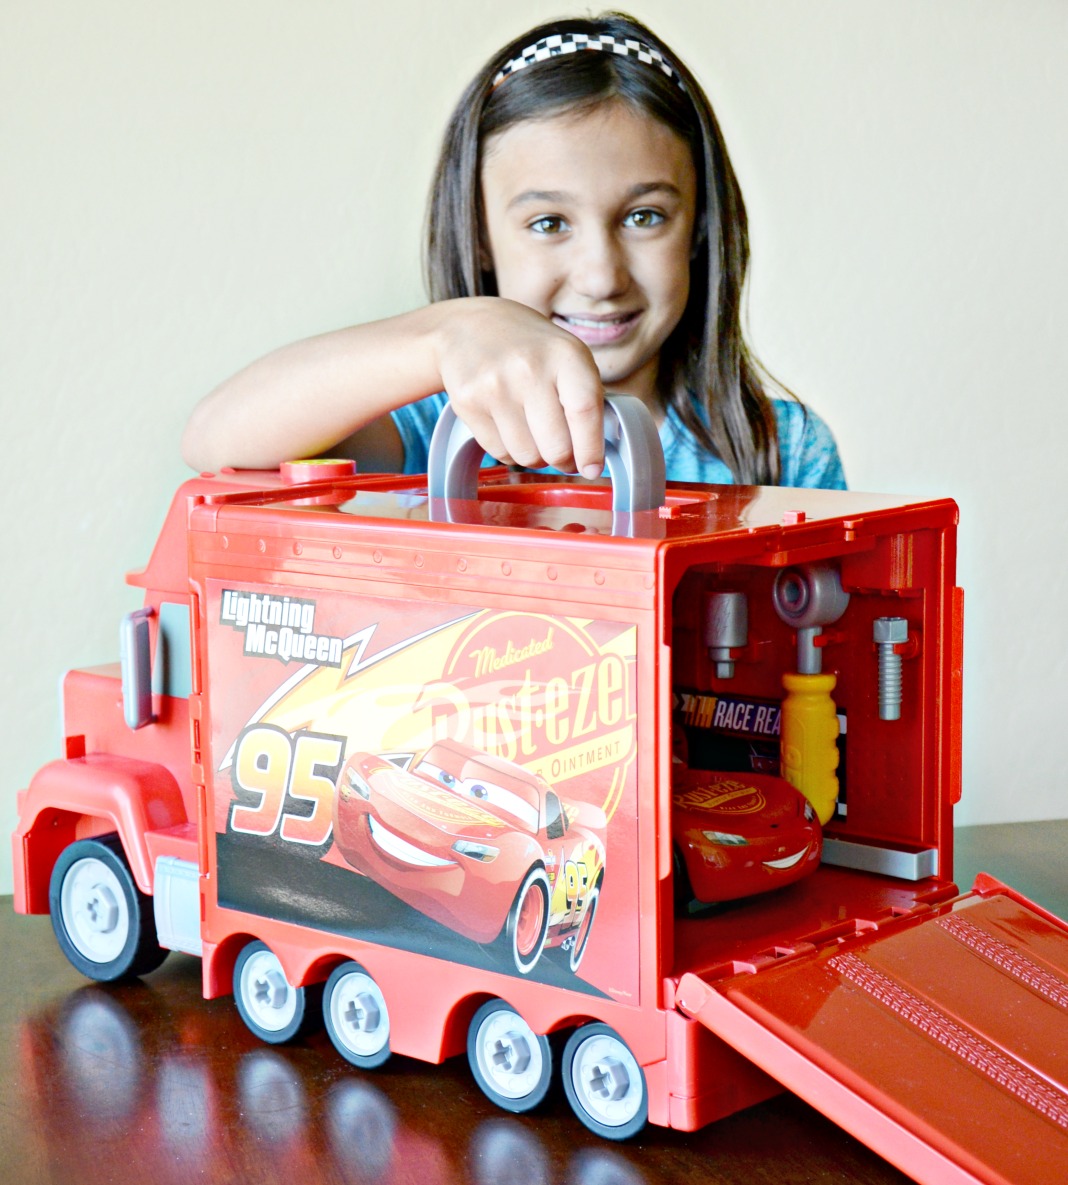 See how quickly you can get Lightning McQueen race ready with a free printable Lightning McQueen Race Ready Challenge Activity paired with Cars 3 toys!